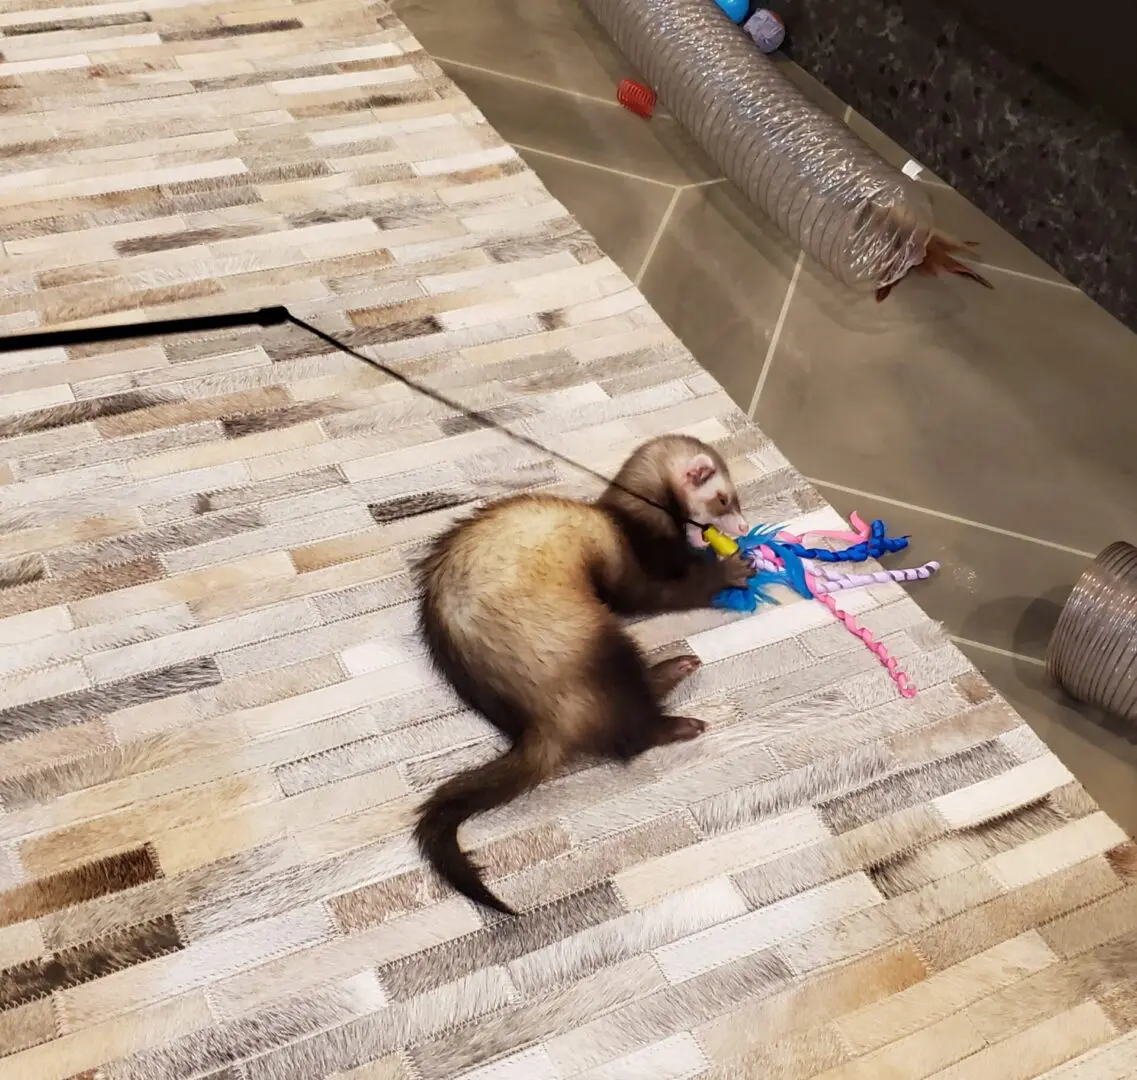 A ferret is walking on the floor with its head down.